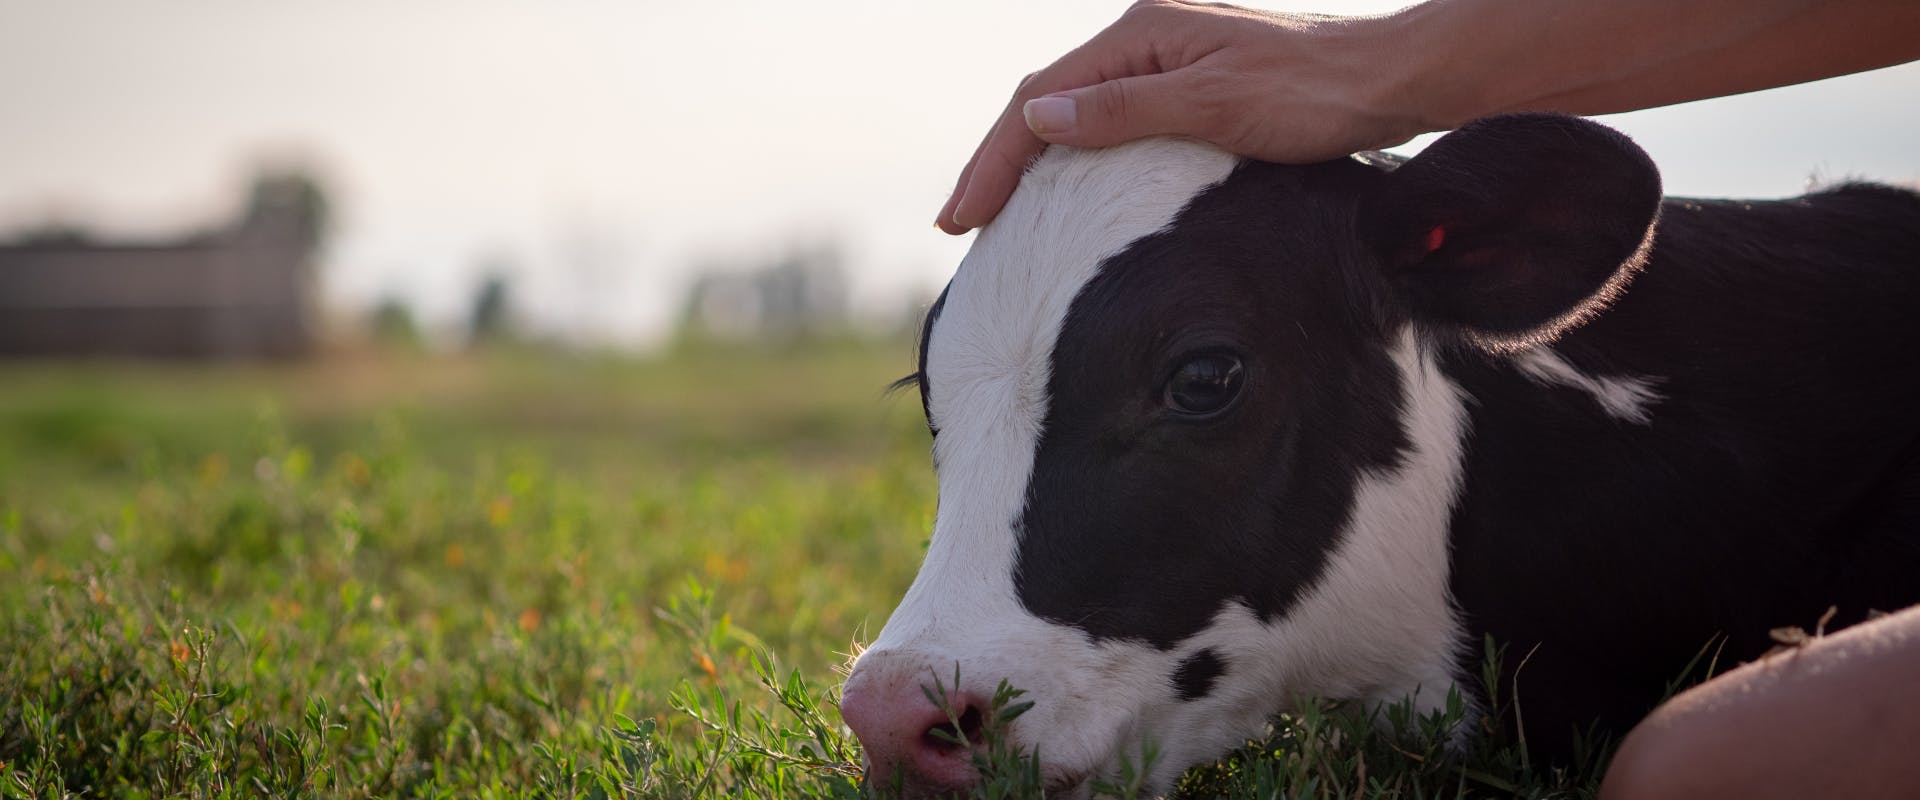 a young black and white calf lying in a farmyard field whilst being pet by a human